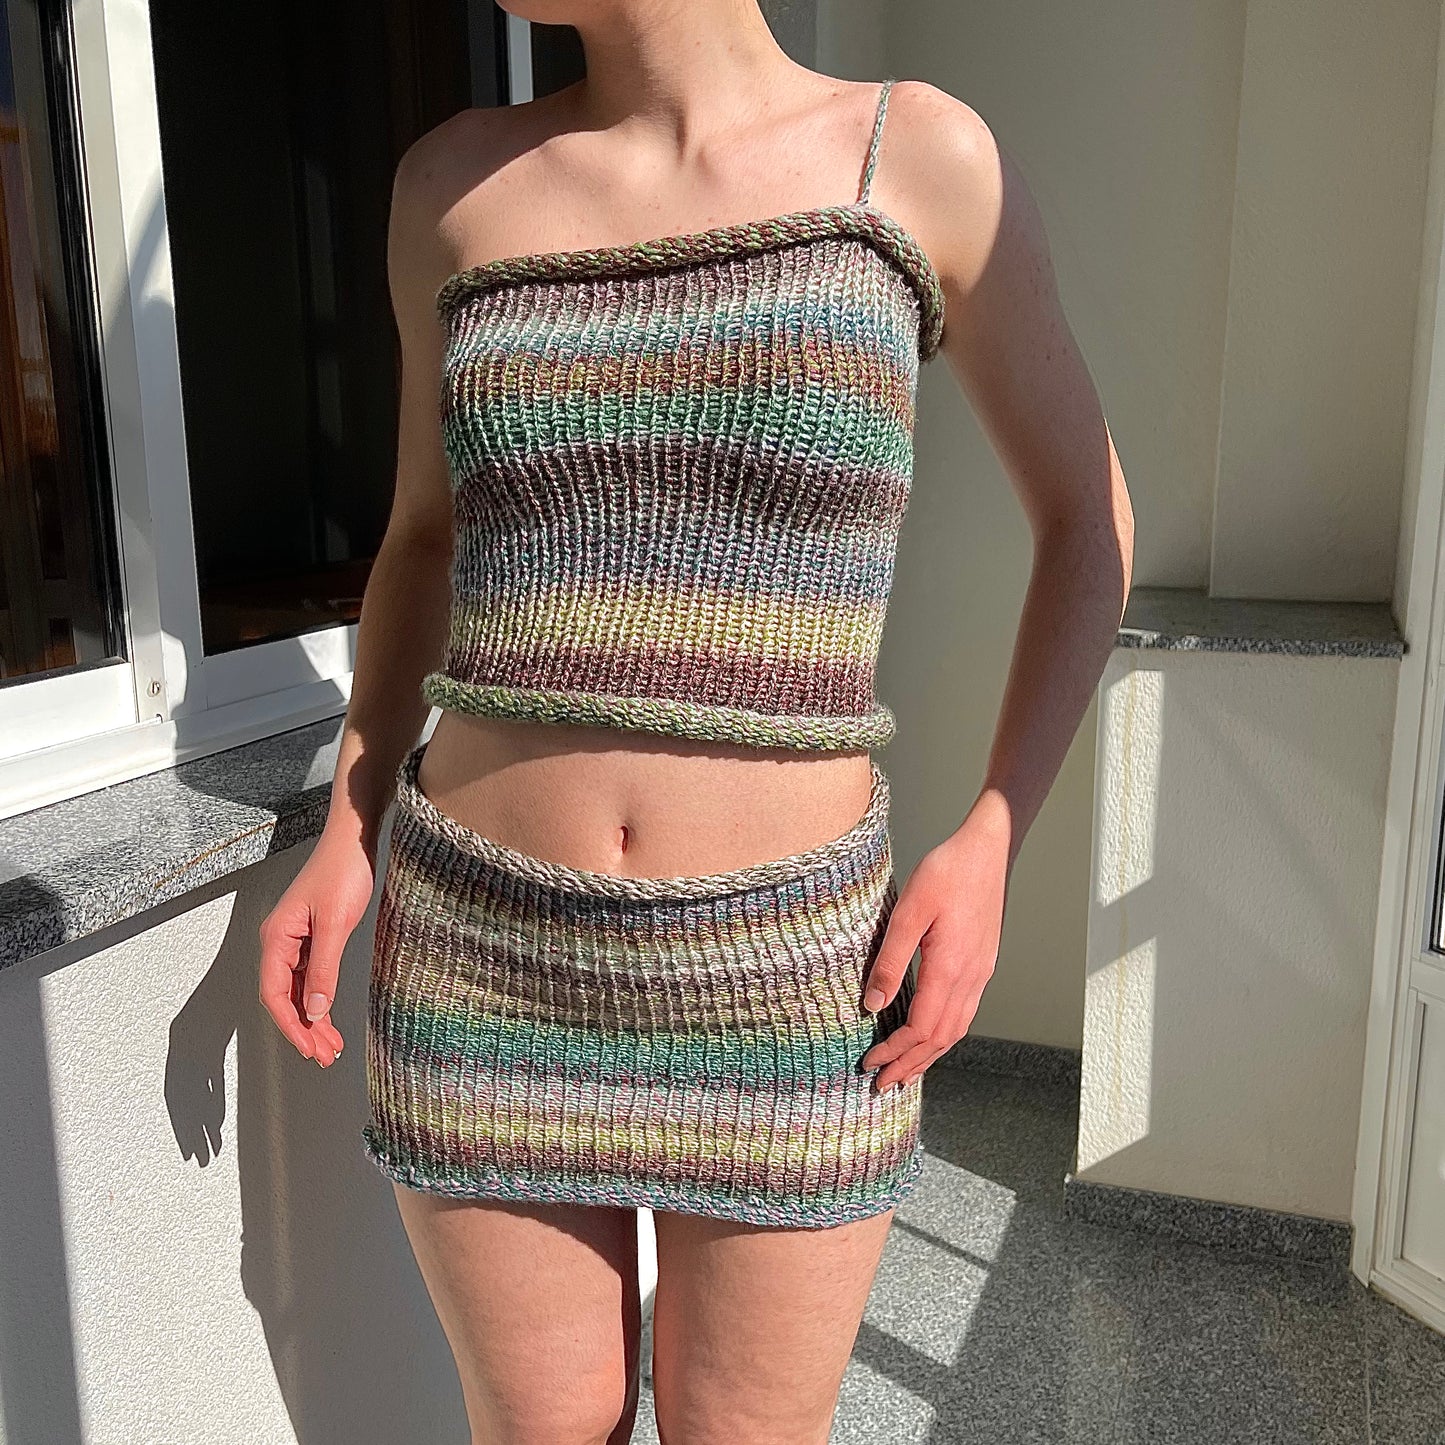 SET: Handmade knitted top and skirt in dusky shades